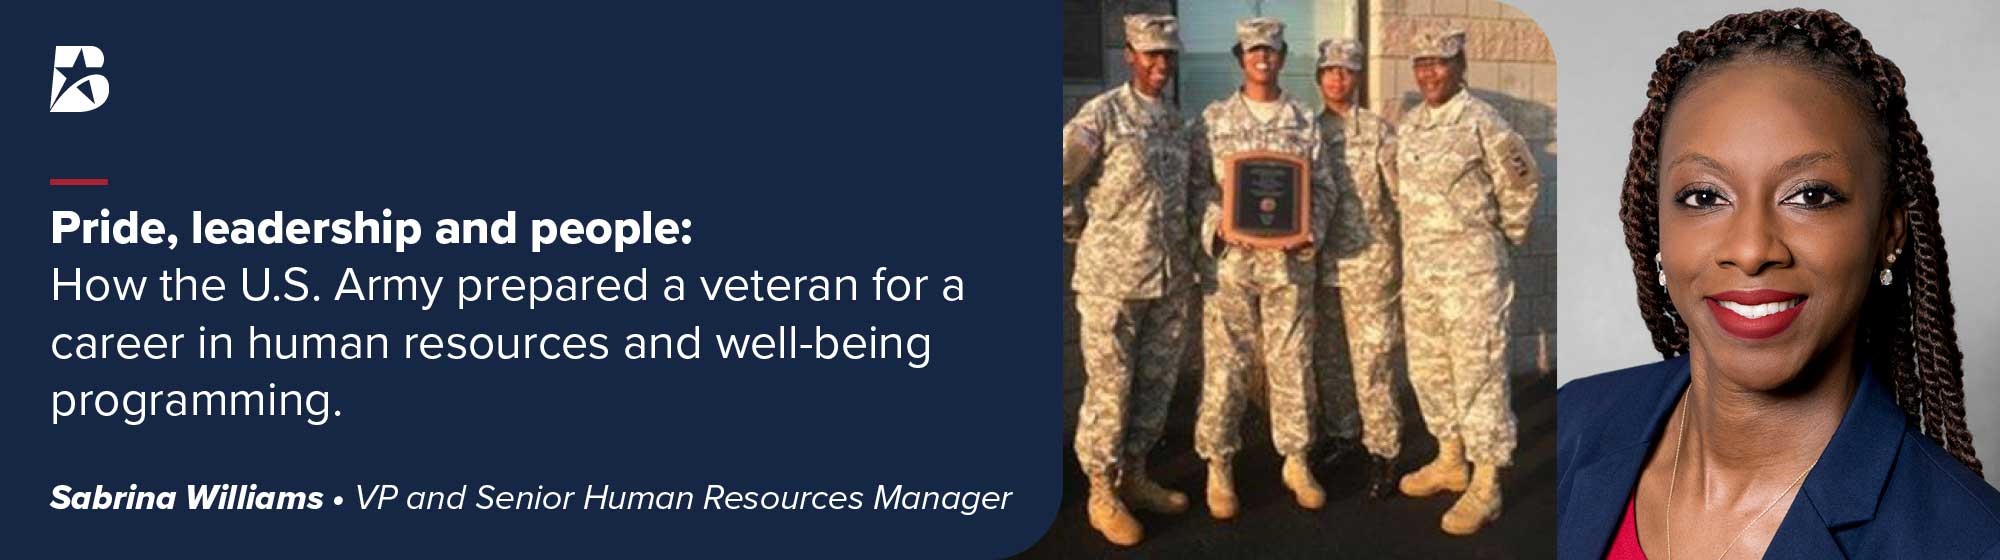 Pride, leadership and people: How the U.S. Army prepared a veteran for a career in human resources and well-being programming.